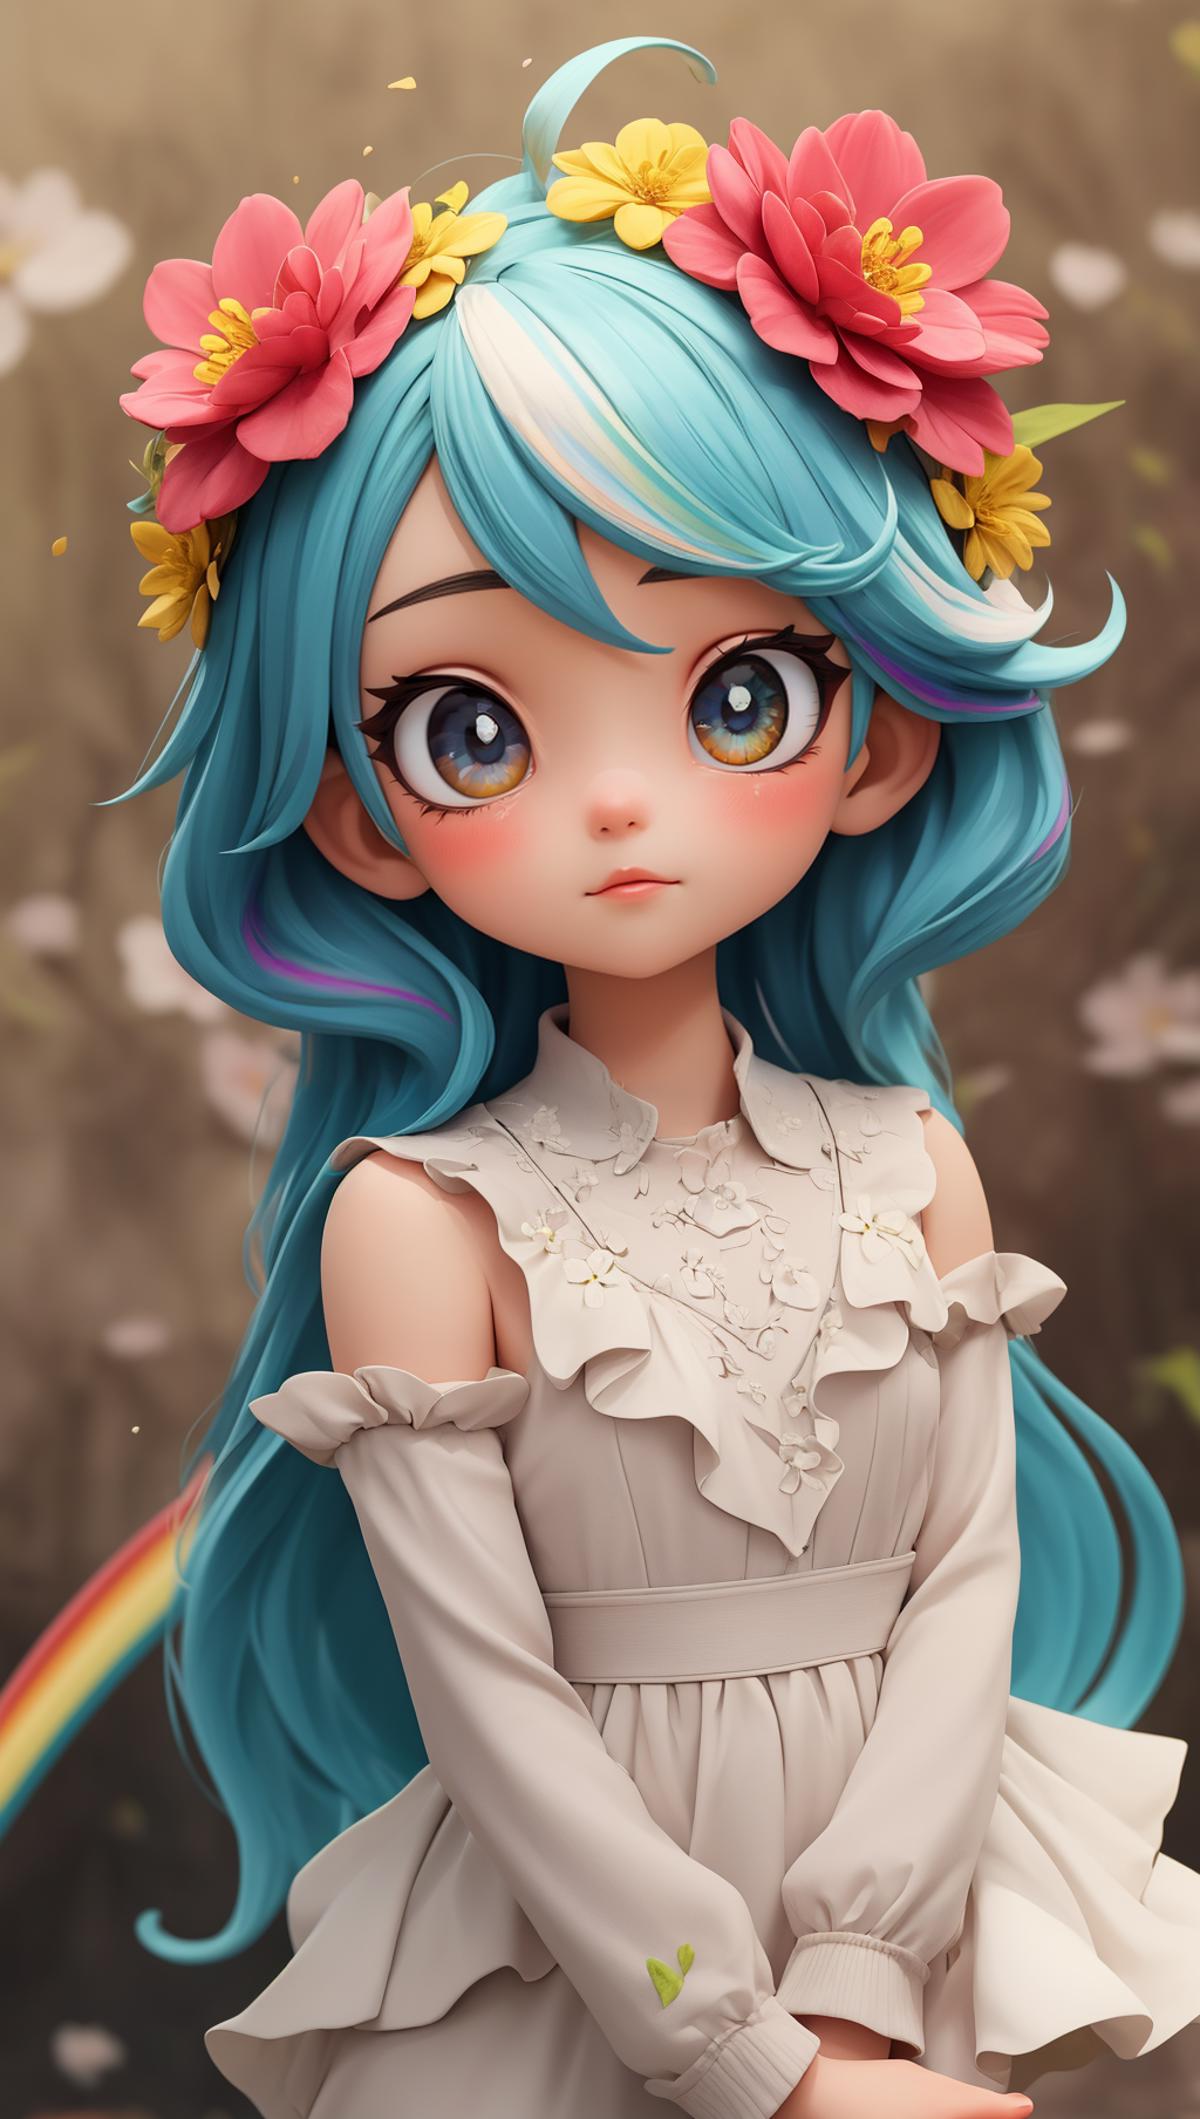 Anime Character with Pink Cheeks and Blue Hair Wearing a Dress with Flowers in Her Hair.